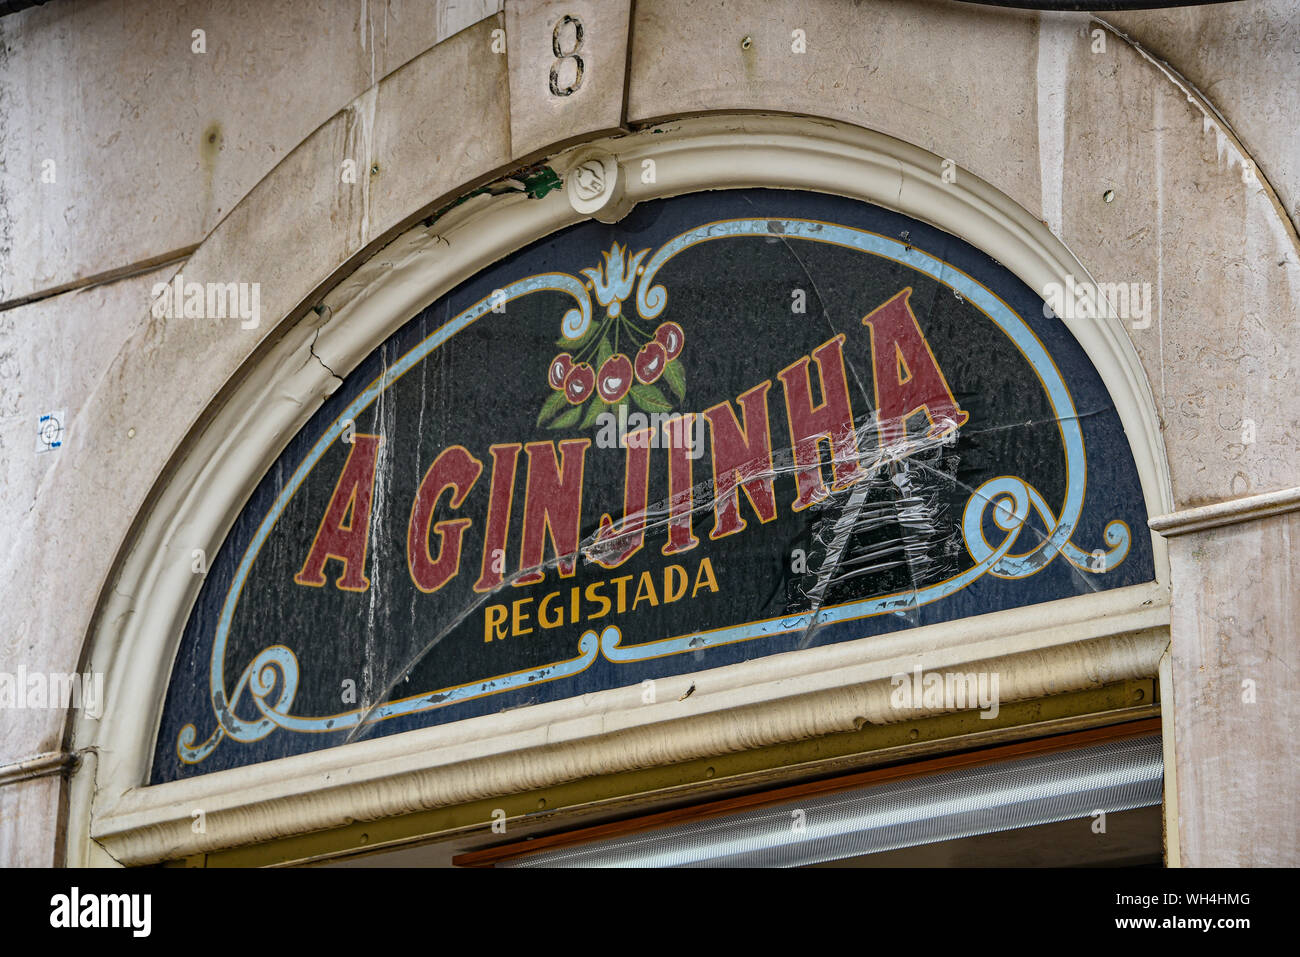 Lisbon, Portugal - July 27, 2019: 'A Ginginha', a famous bar dedicated to Ginginha, a traditional Sour Cherry Brandy Stock Photo